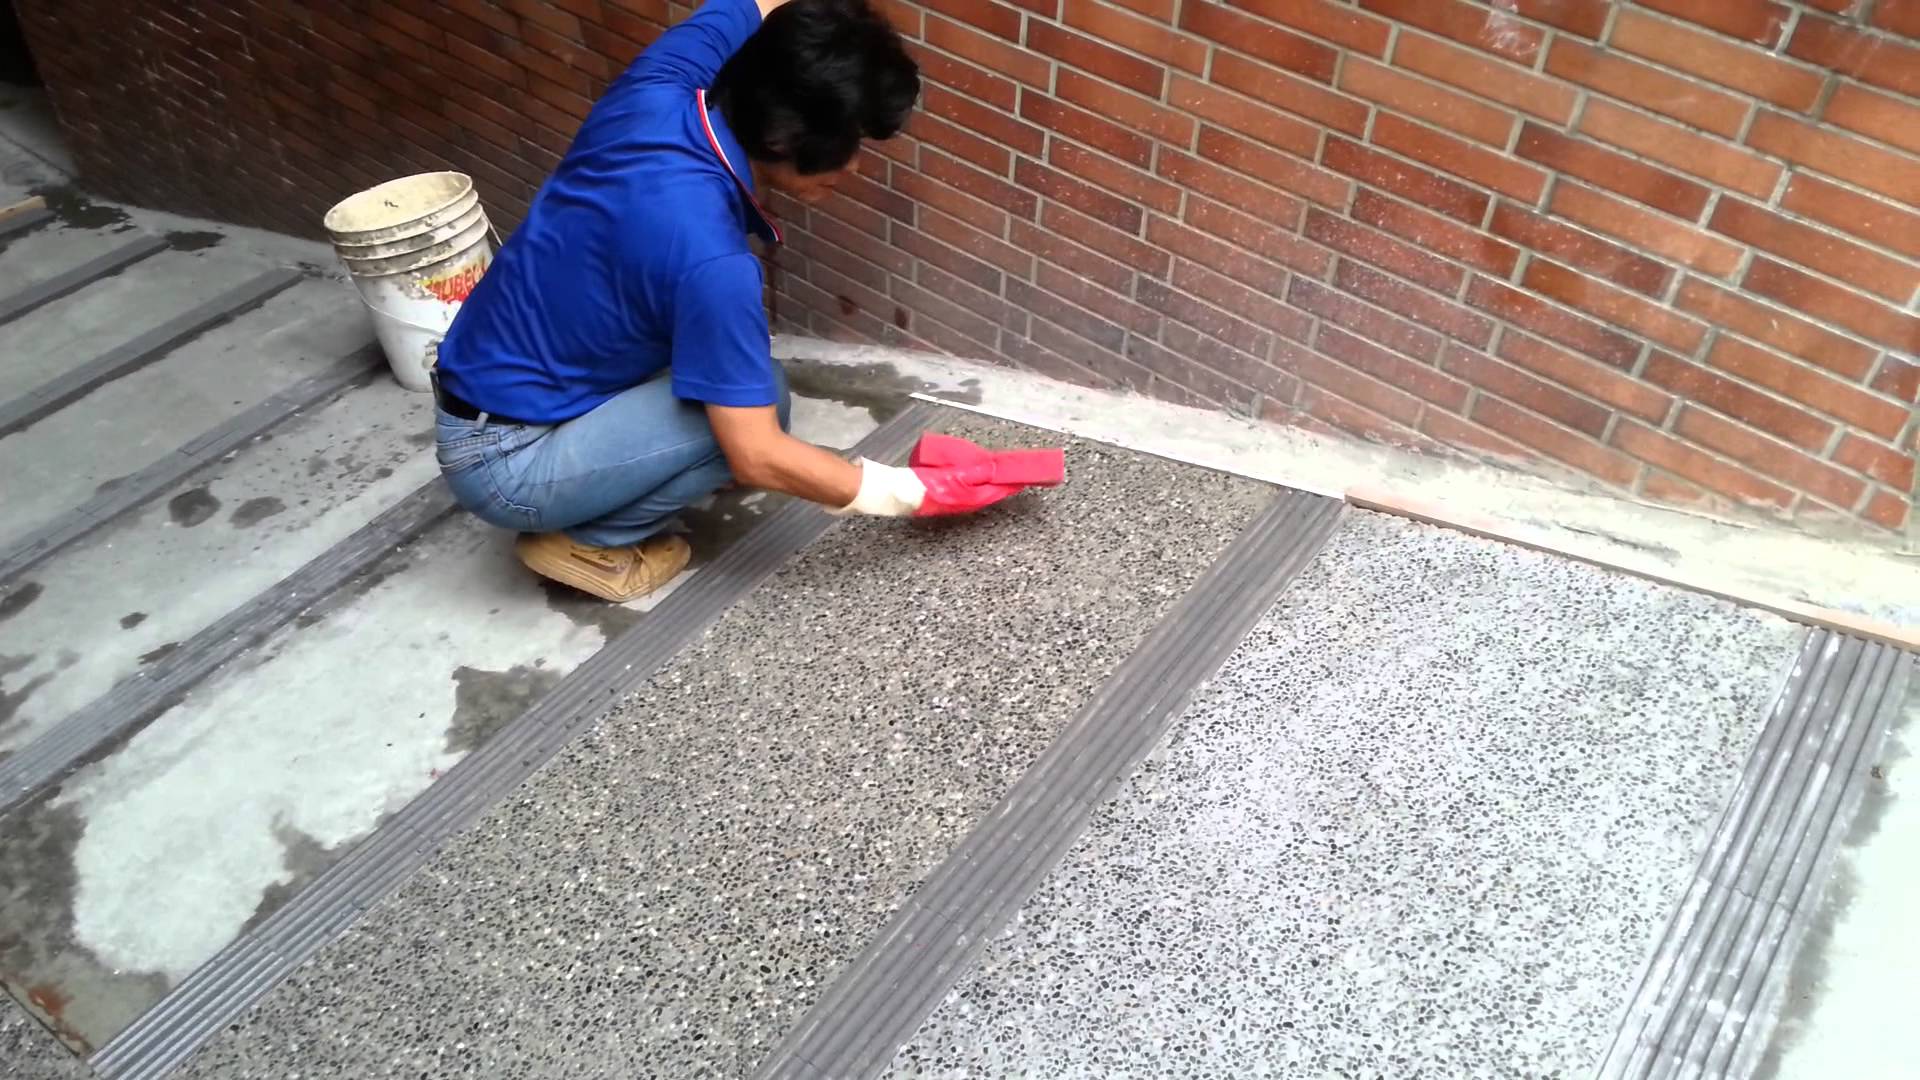 Cement Rendering On Driveway With Small Stone Part 3 - YouTube